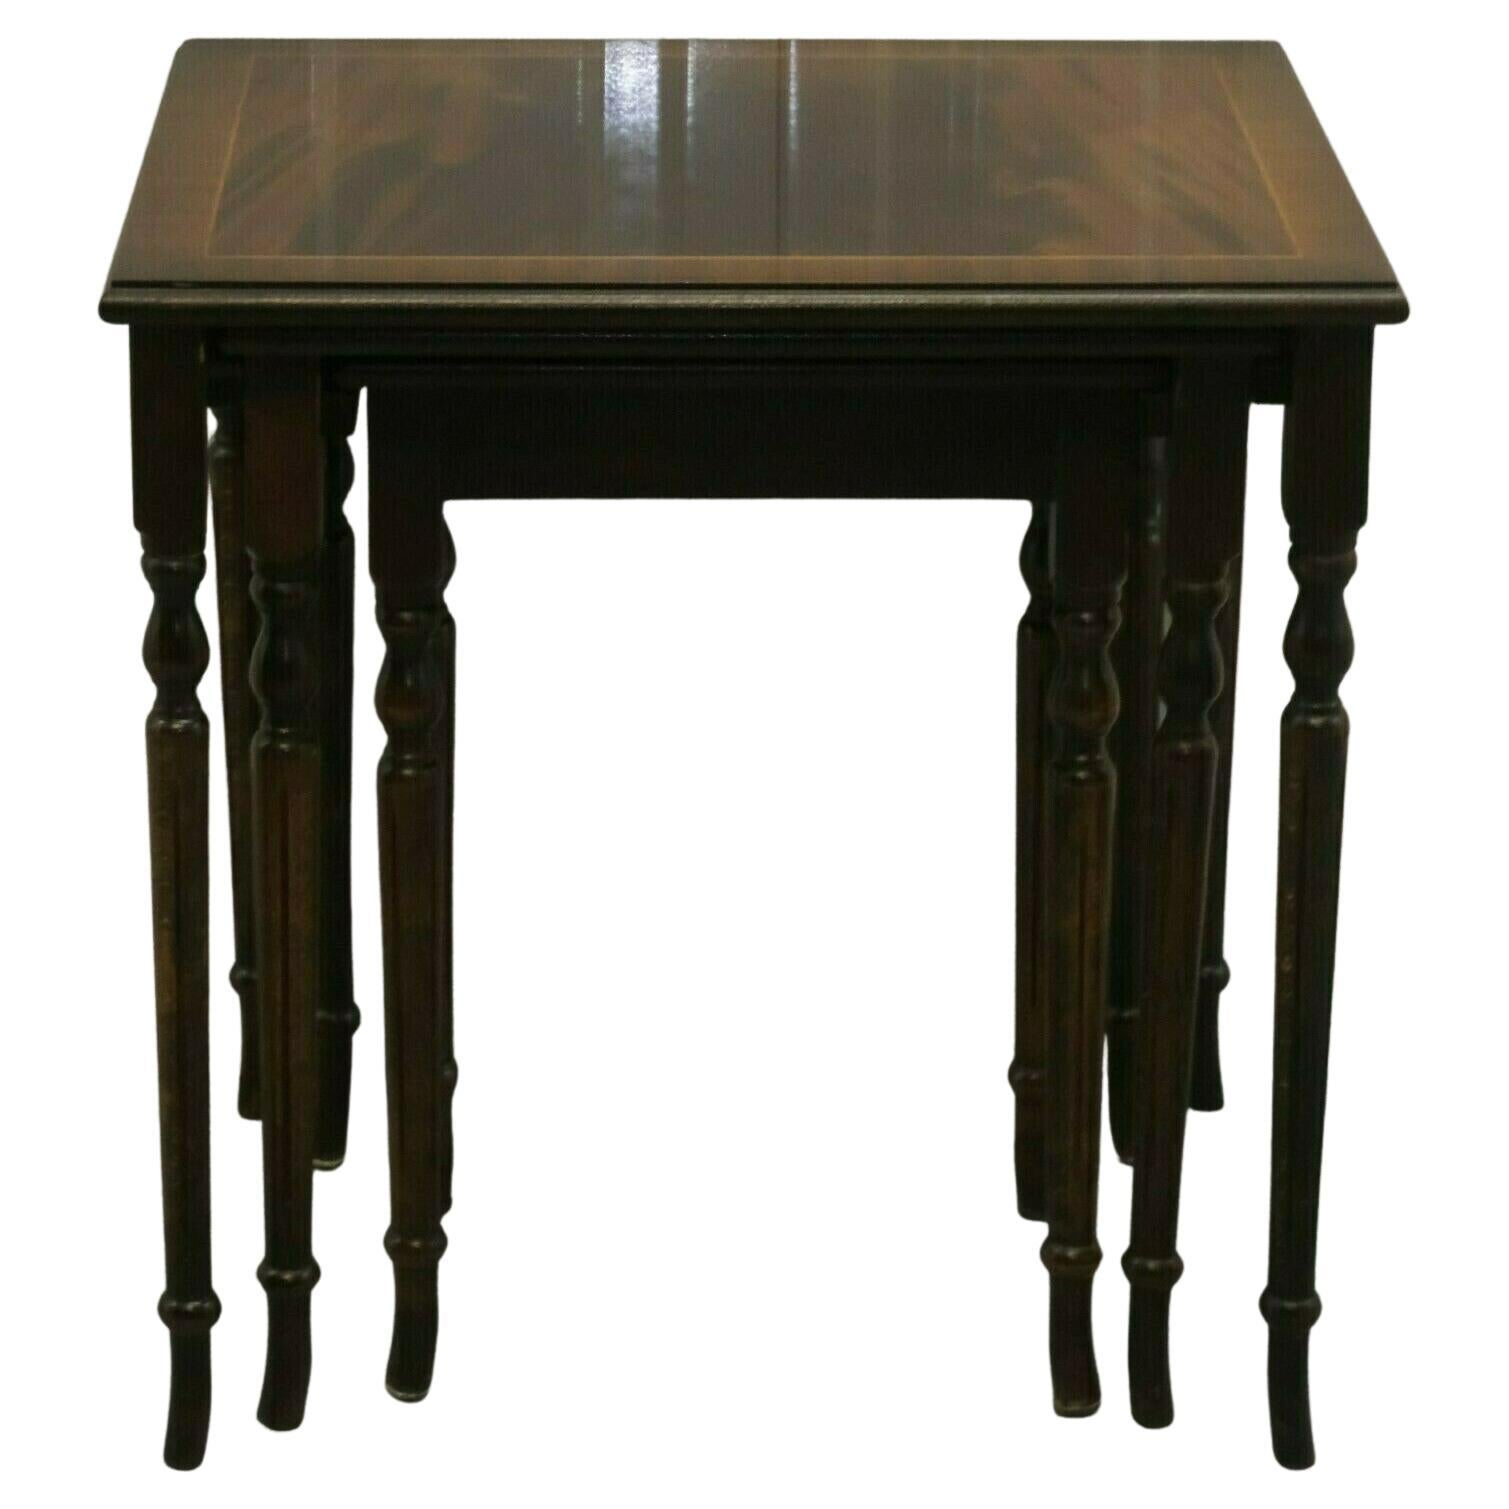 We are delighted to offer for sale this gorgeous mahogany brown nest of tables standing on beautiful fluted legs.

These tables are not only very versatile but also very pretty pieces of furniture to look at. They can be used for small drinks